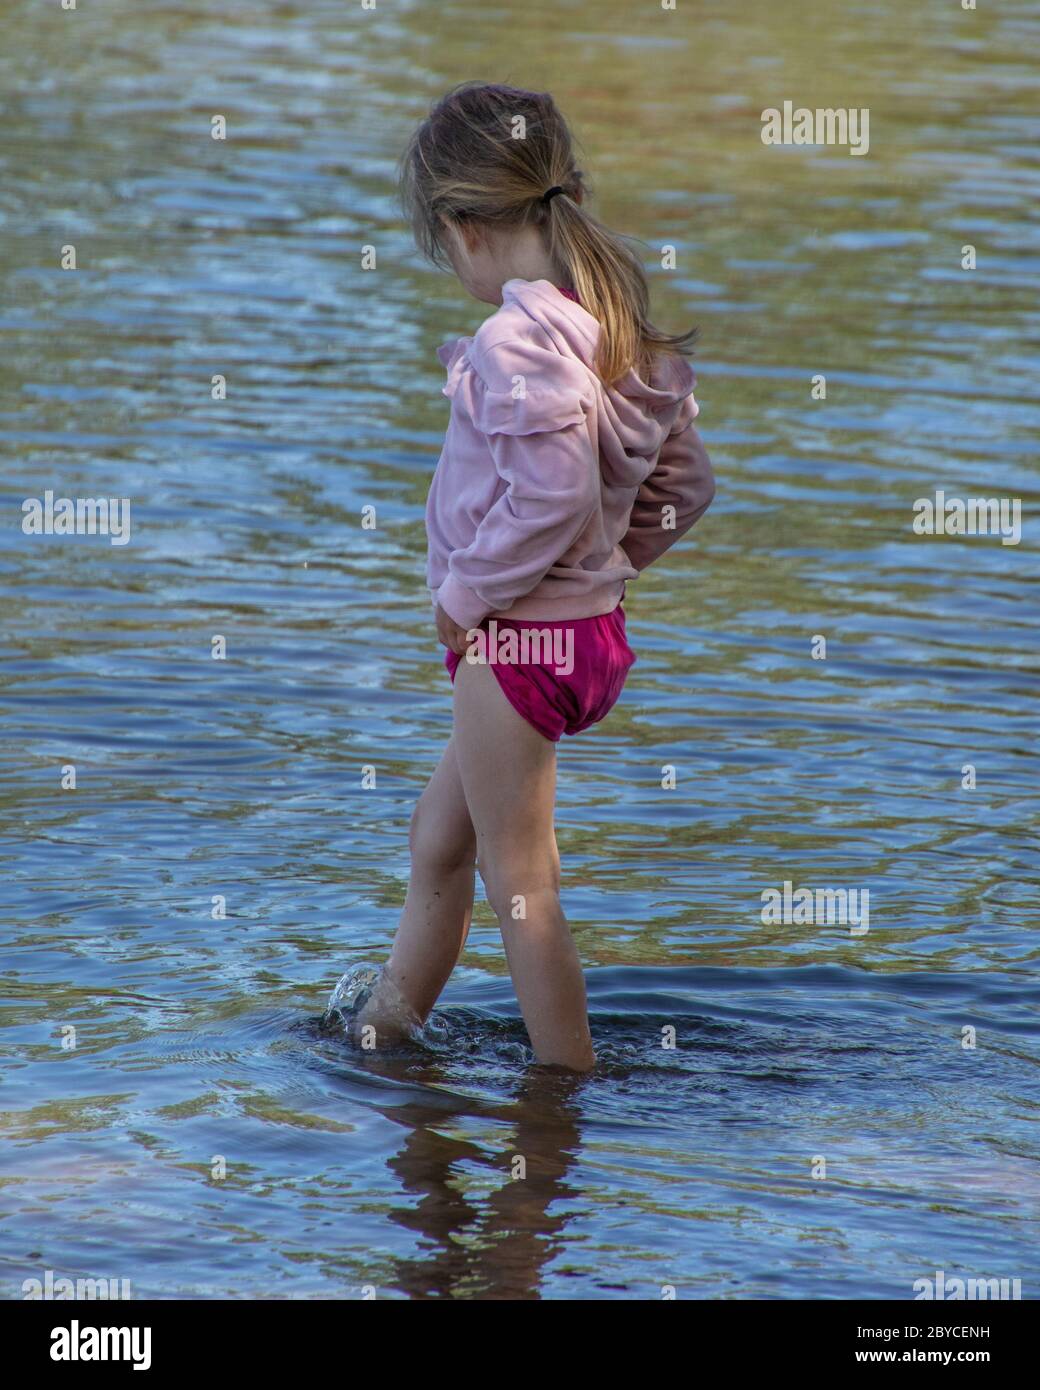 Wading in the Water Stock Photo